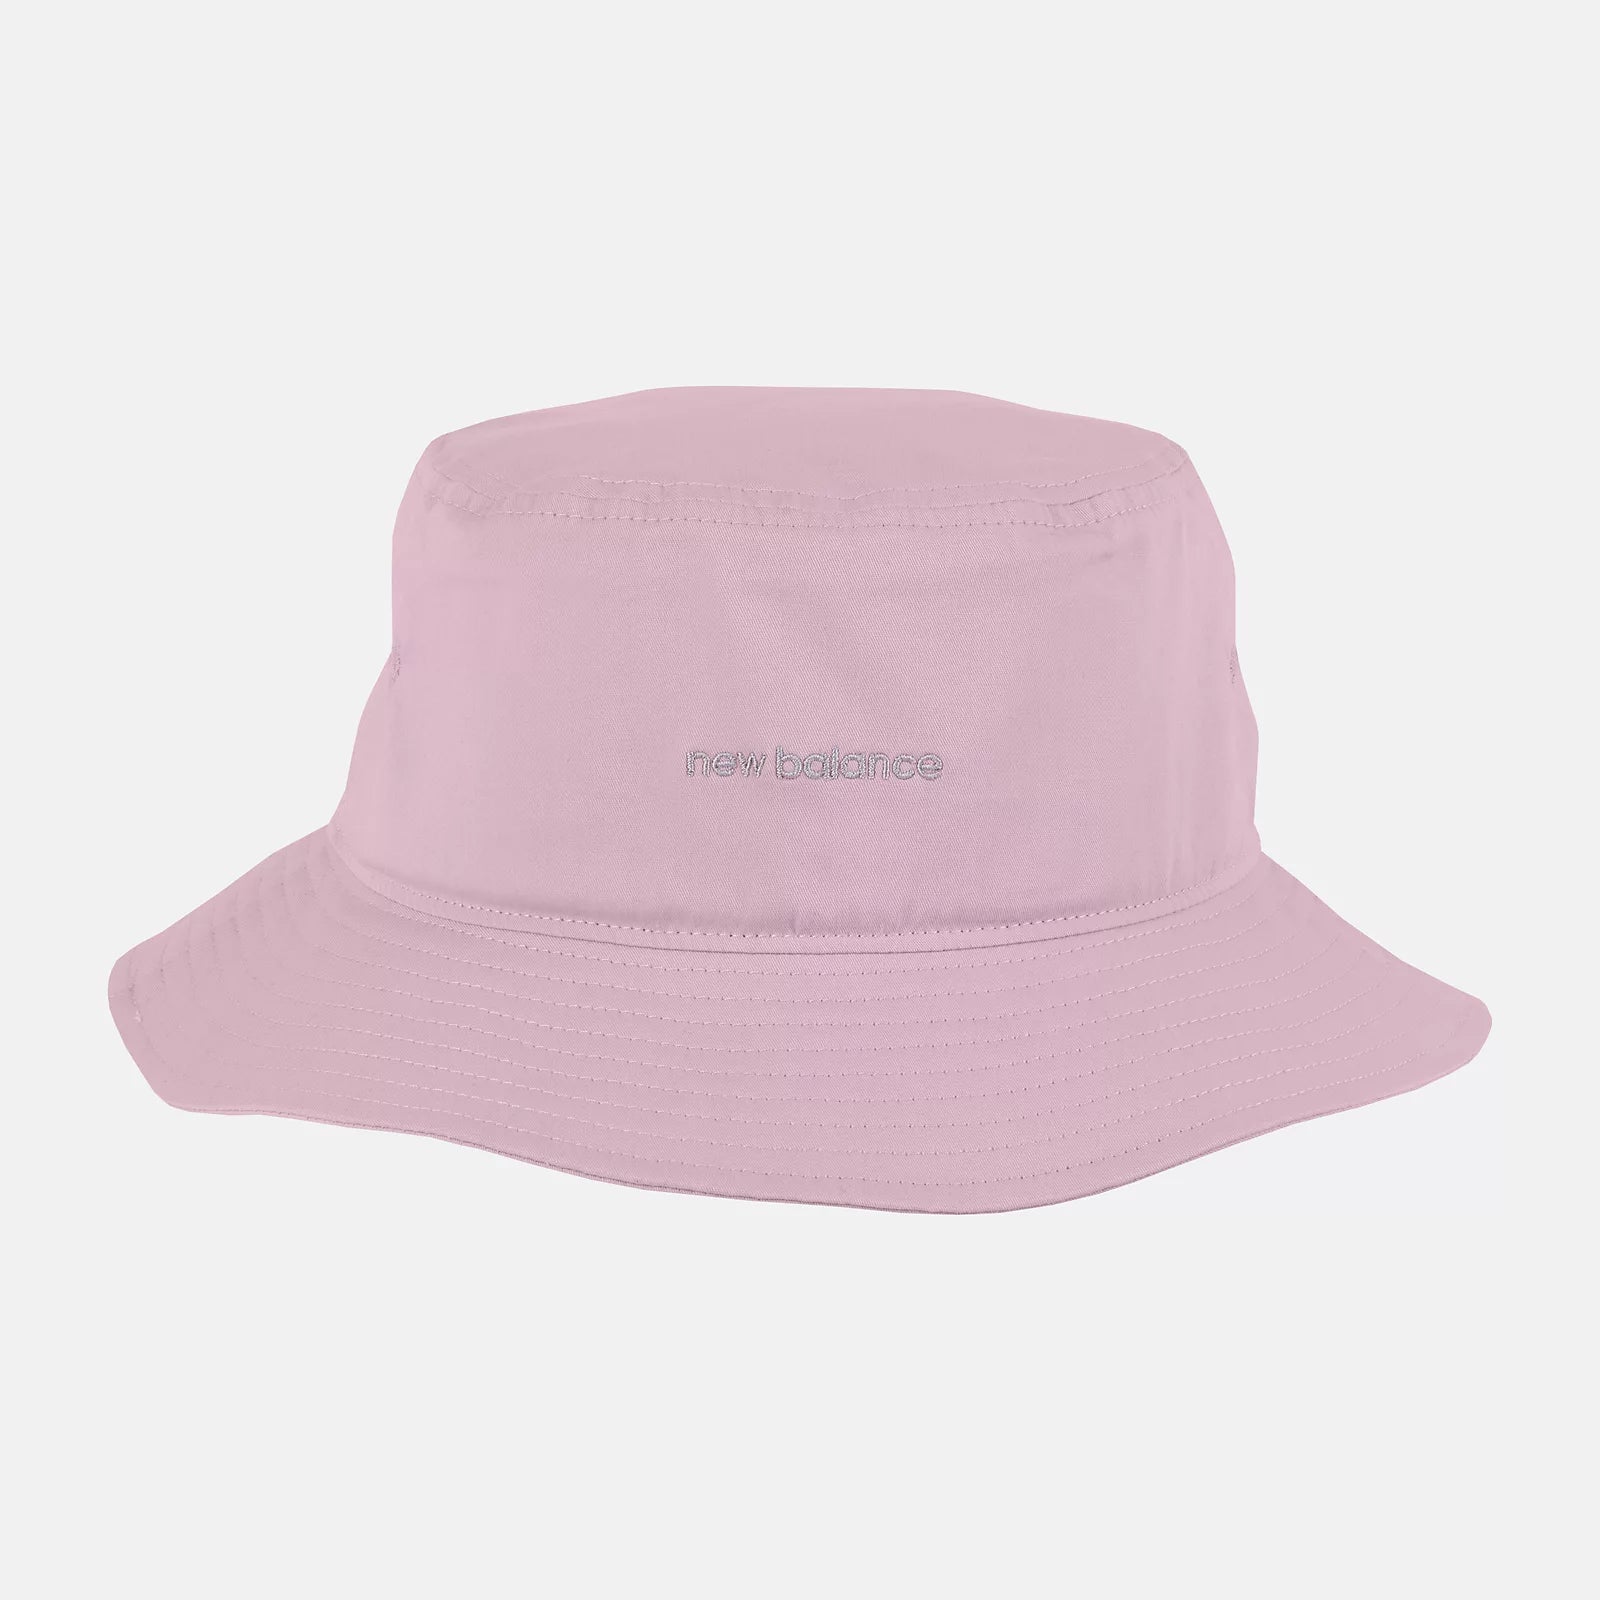 NEW BALANCE Bucket Hat in Pink Haze LAH13003 O/S PINK HAZE FROM EIGHTYWINGOLD - OFFICIAL BRAND PARTNER